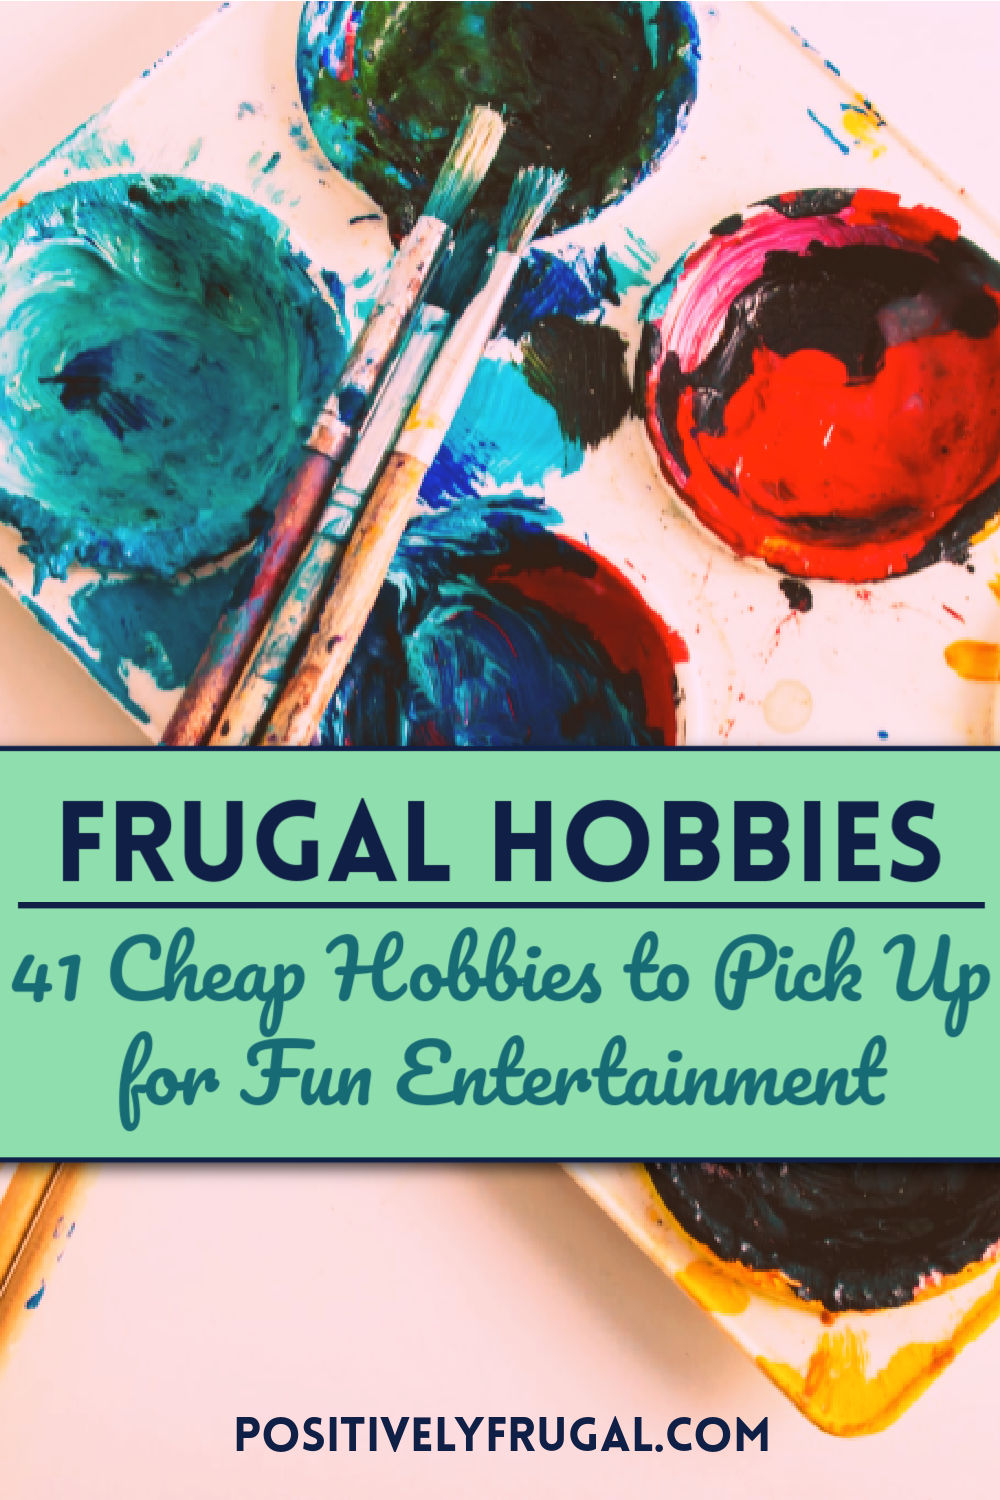 41 Cheap Hobbies to Pick Up for Fun Entertainment by PositivelyFrugal.com